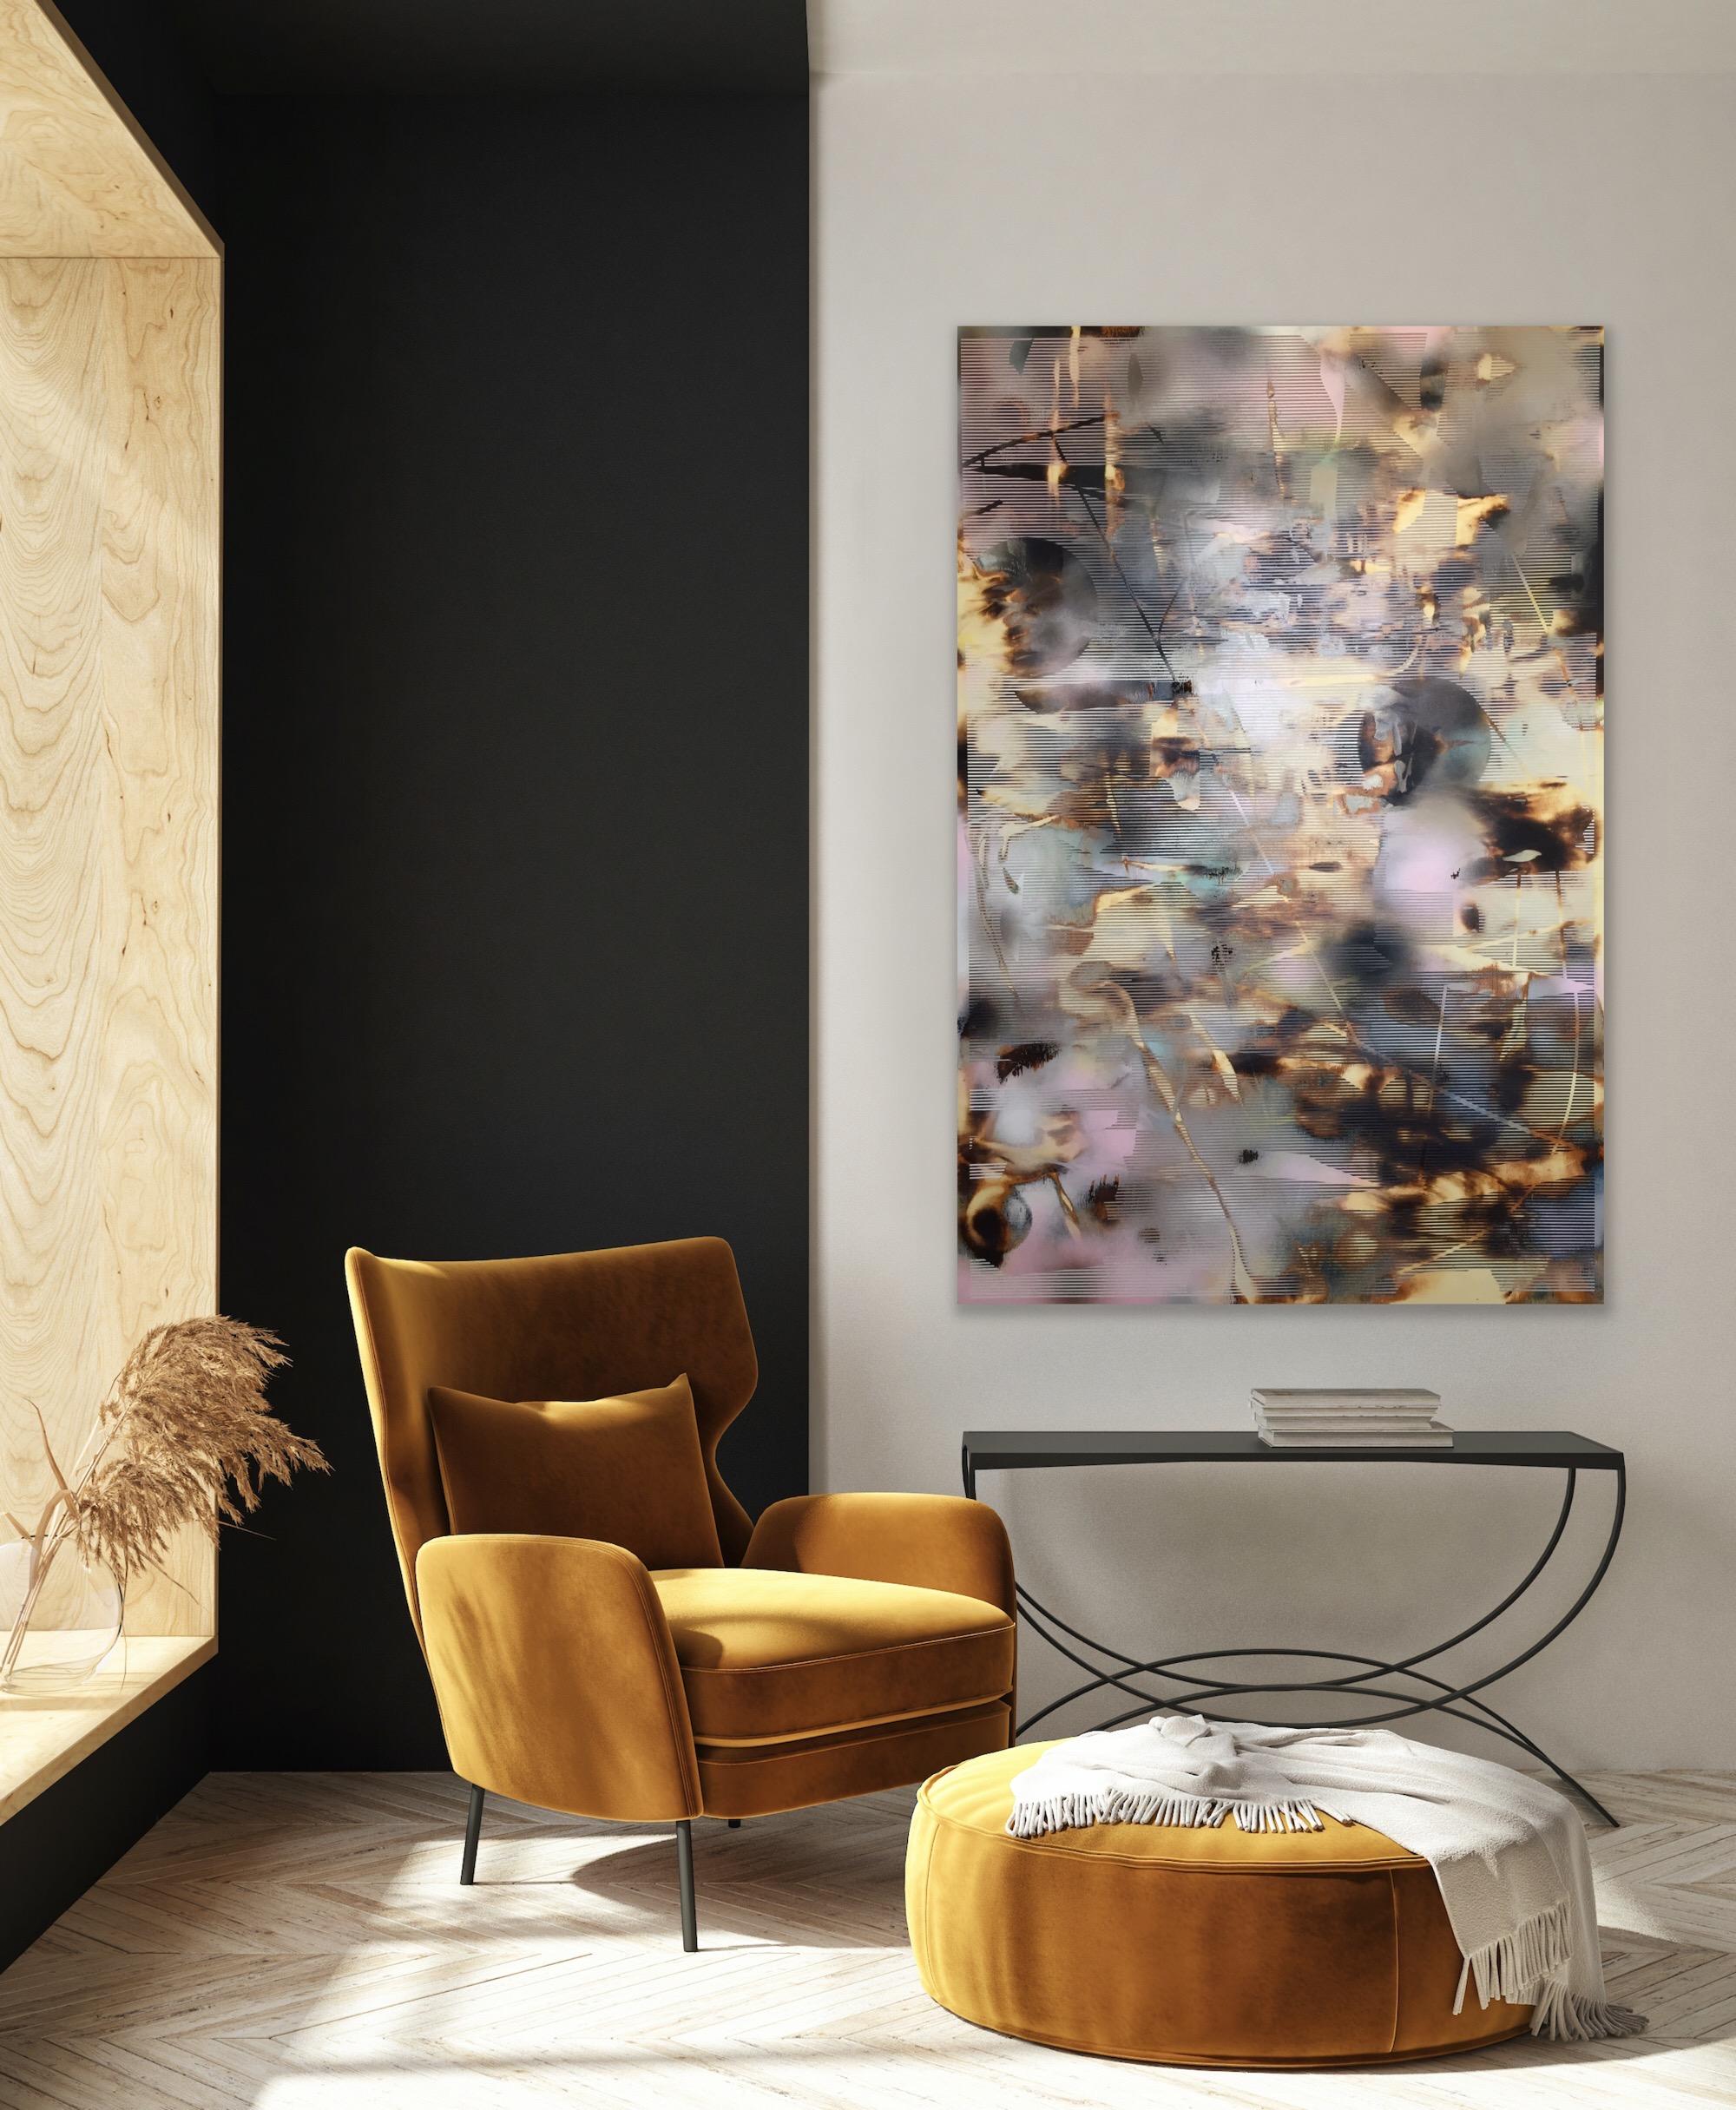 Screen tbd1 (abstract grid wood painting contemporary neutrals natural motifs) - Mixed Media Art by Melisa Taylor Metzger